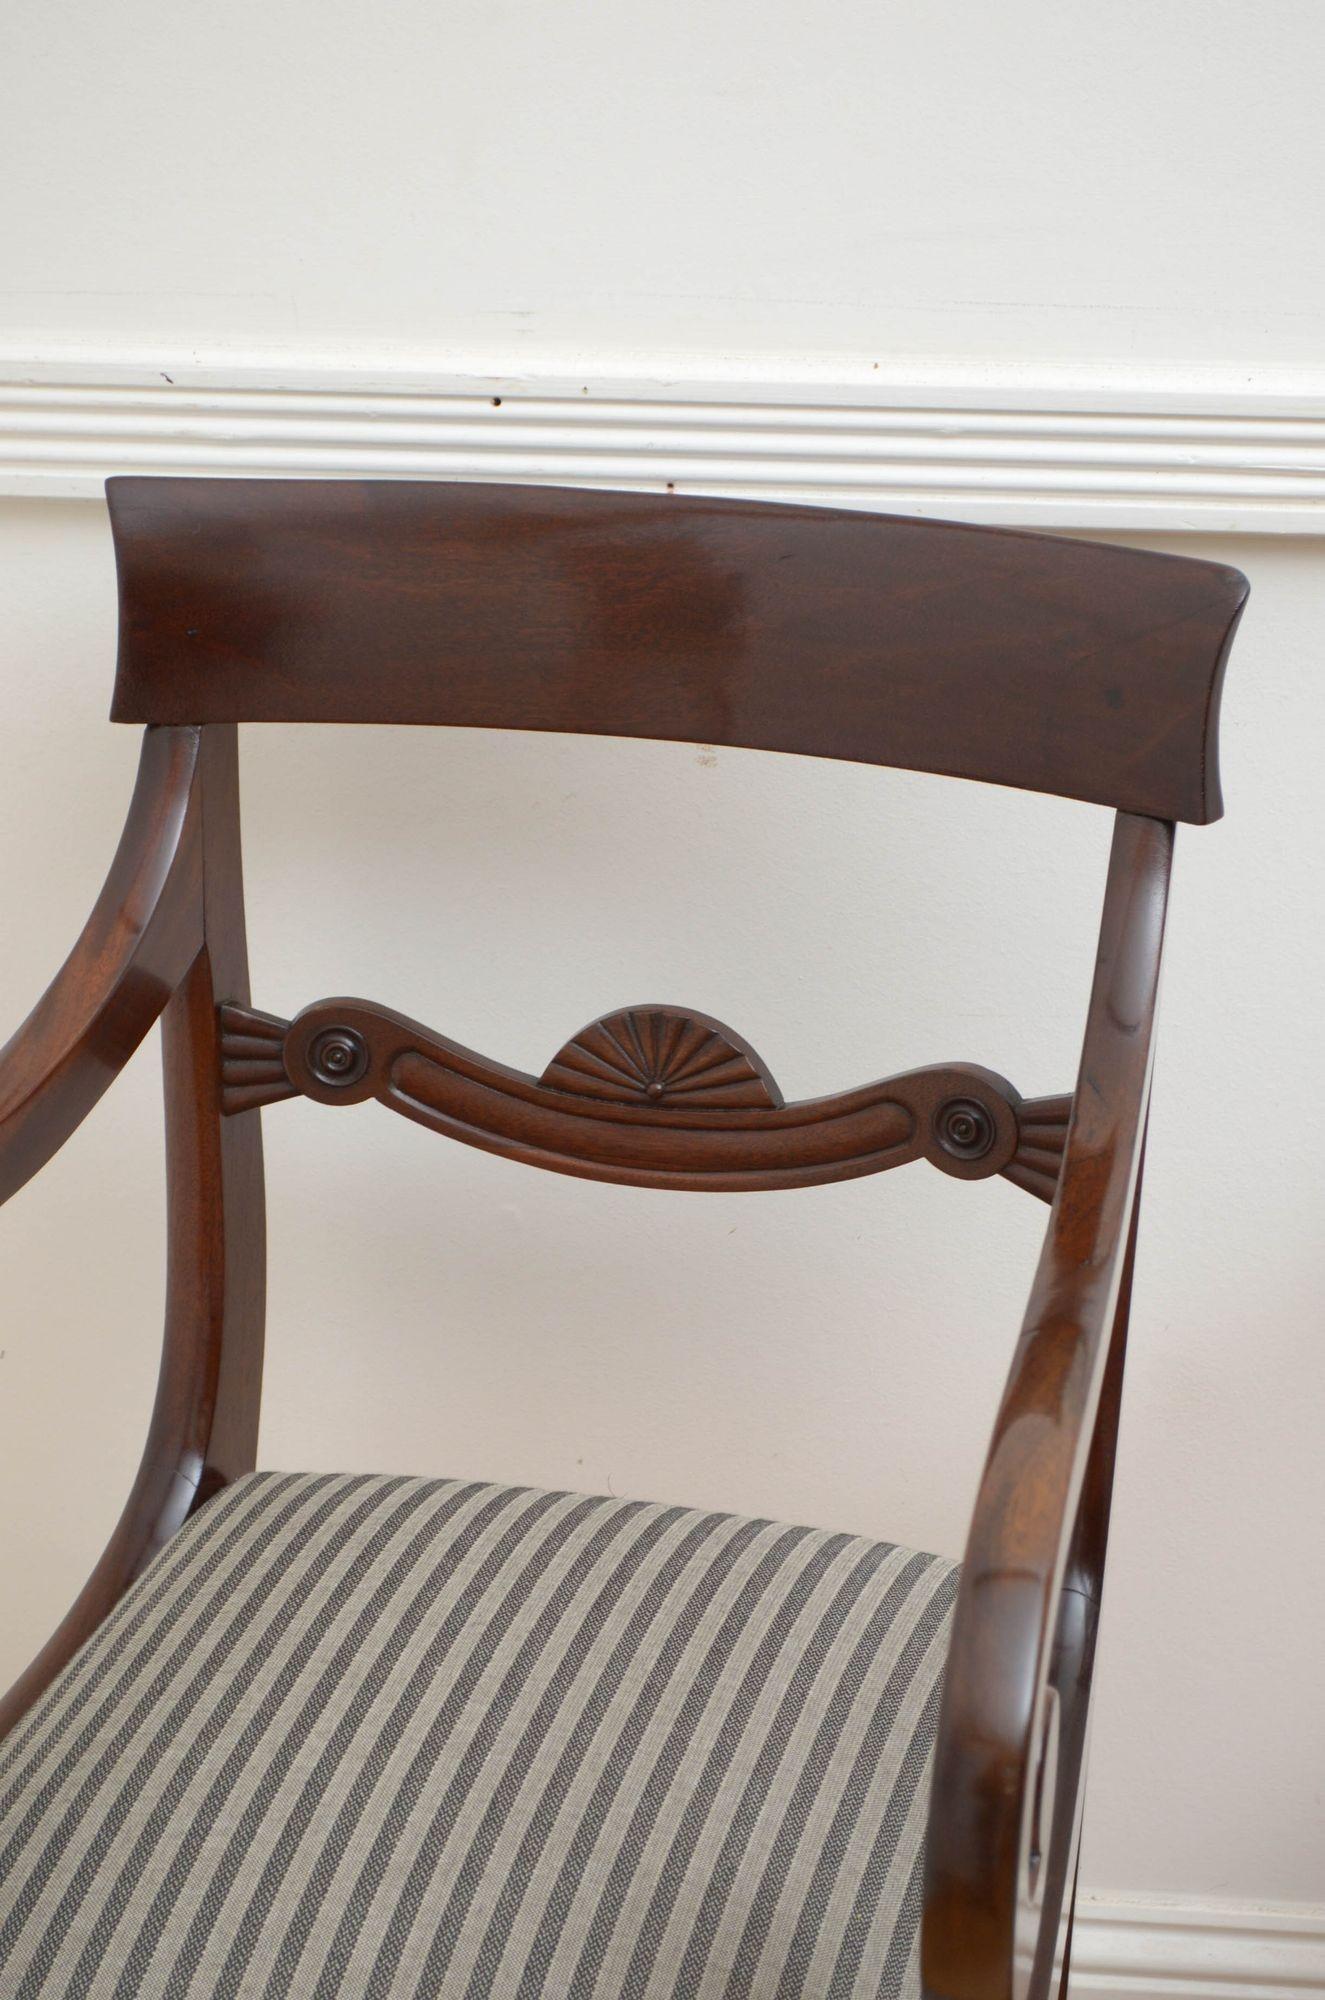 Sn5368 pair of William IV elbow chairs, each having figured mahogany top rail with carved mid rail below and newly recovered drop in seat flanked by open, scroll arms, standing on turned and carved carved legs. This antique pair of chairs is in home